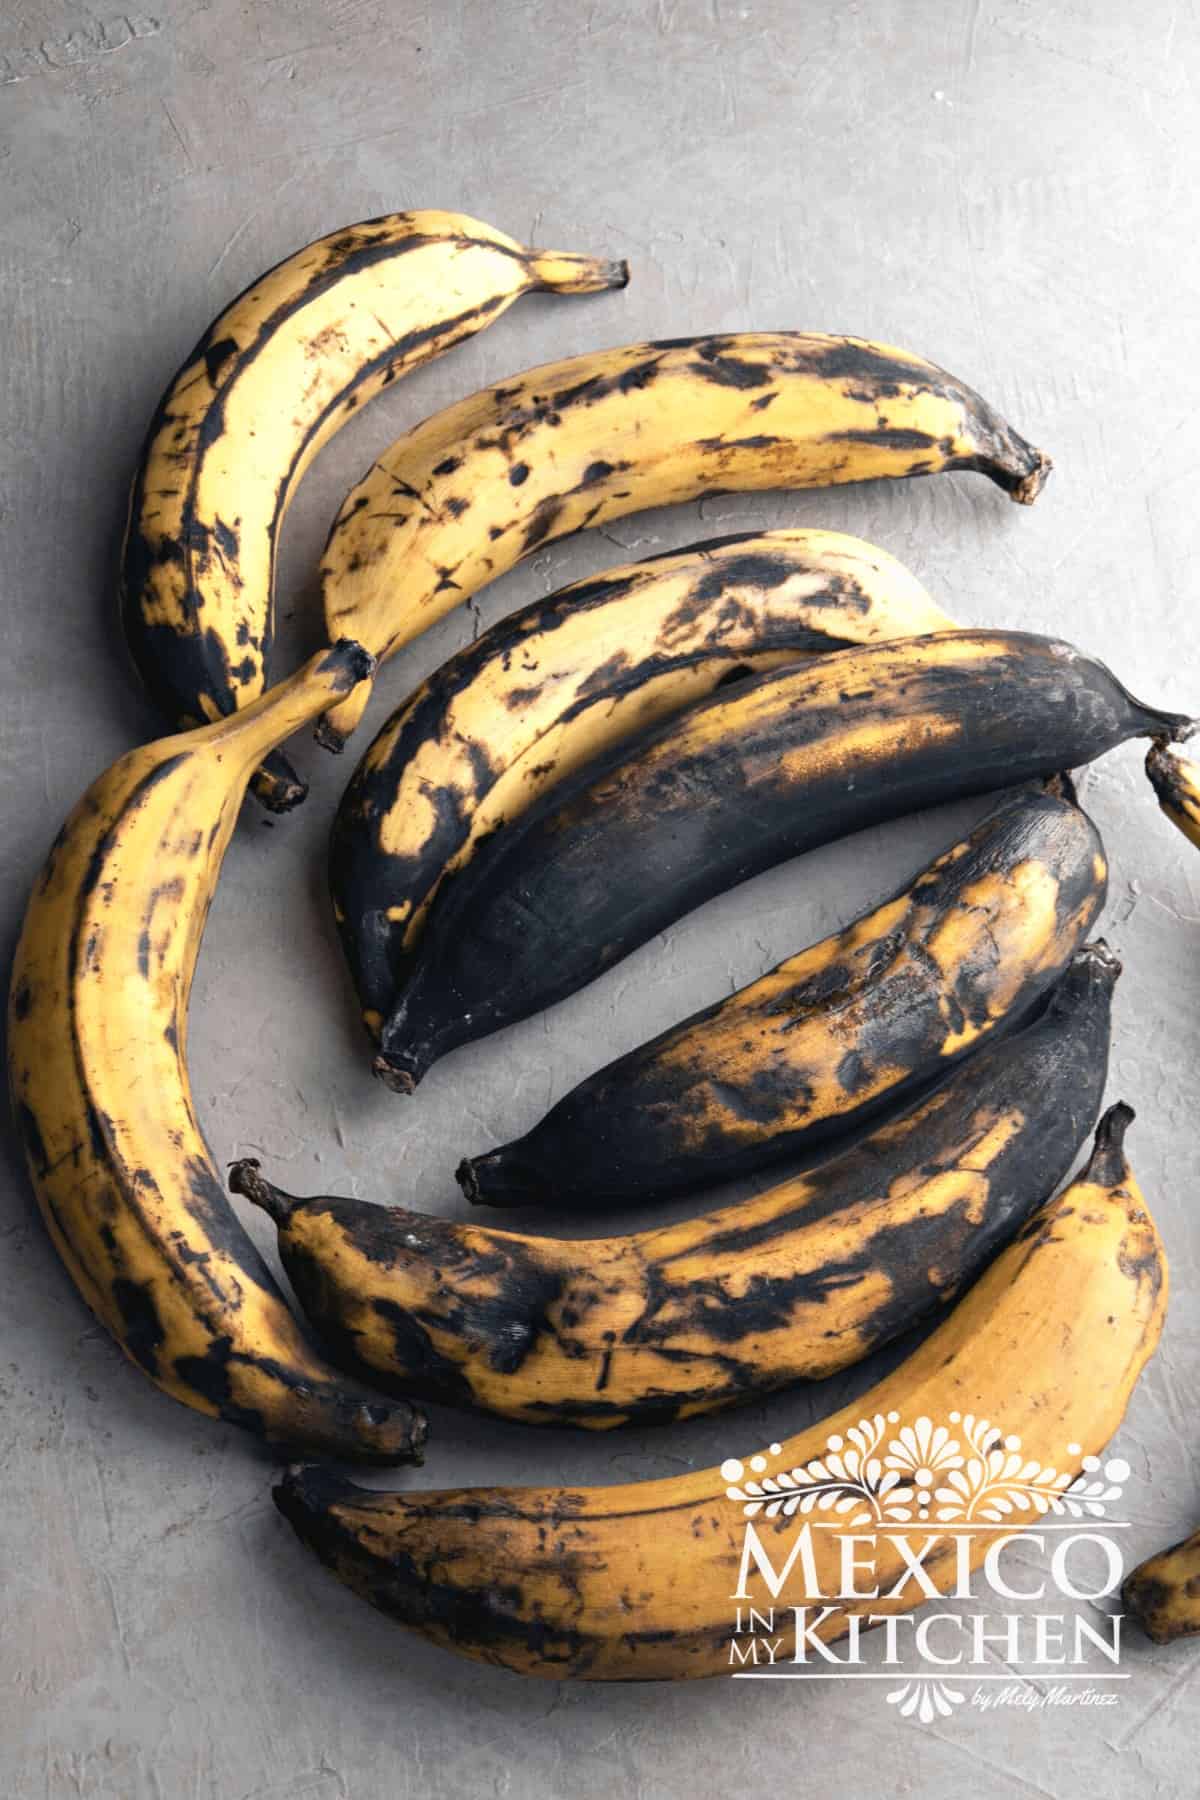 Plantains in different stages of ripening